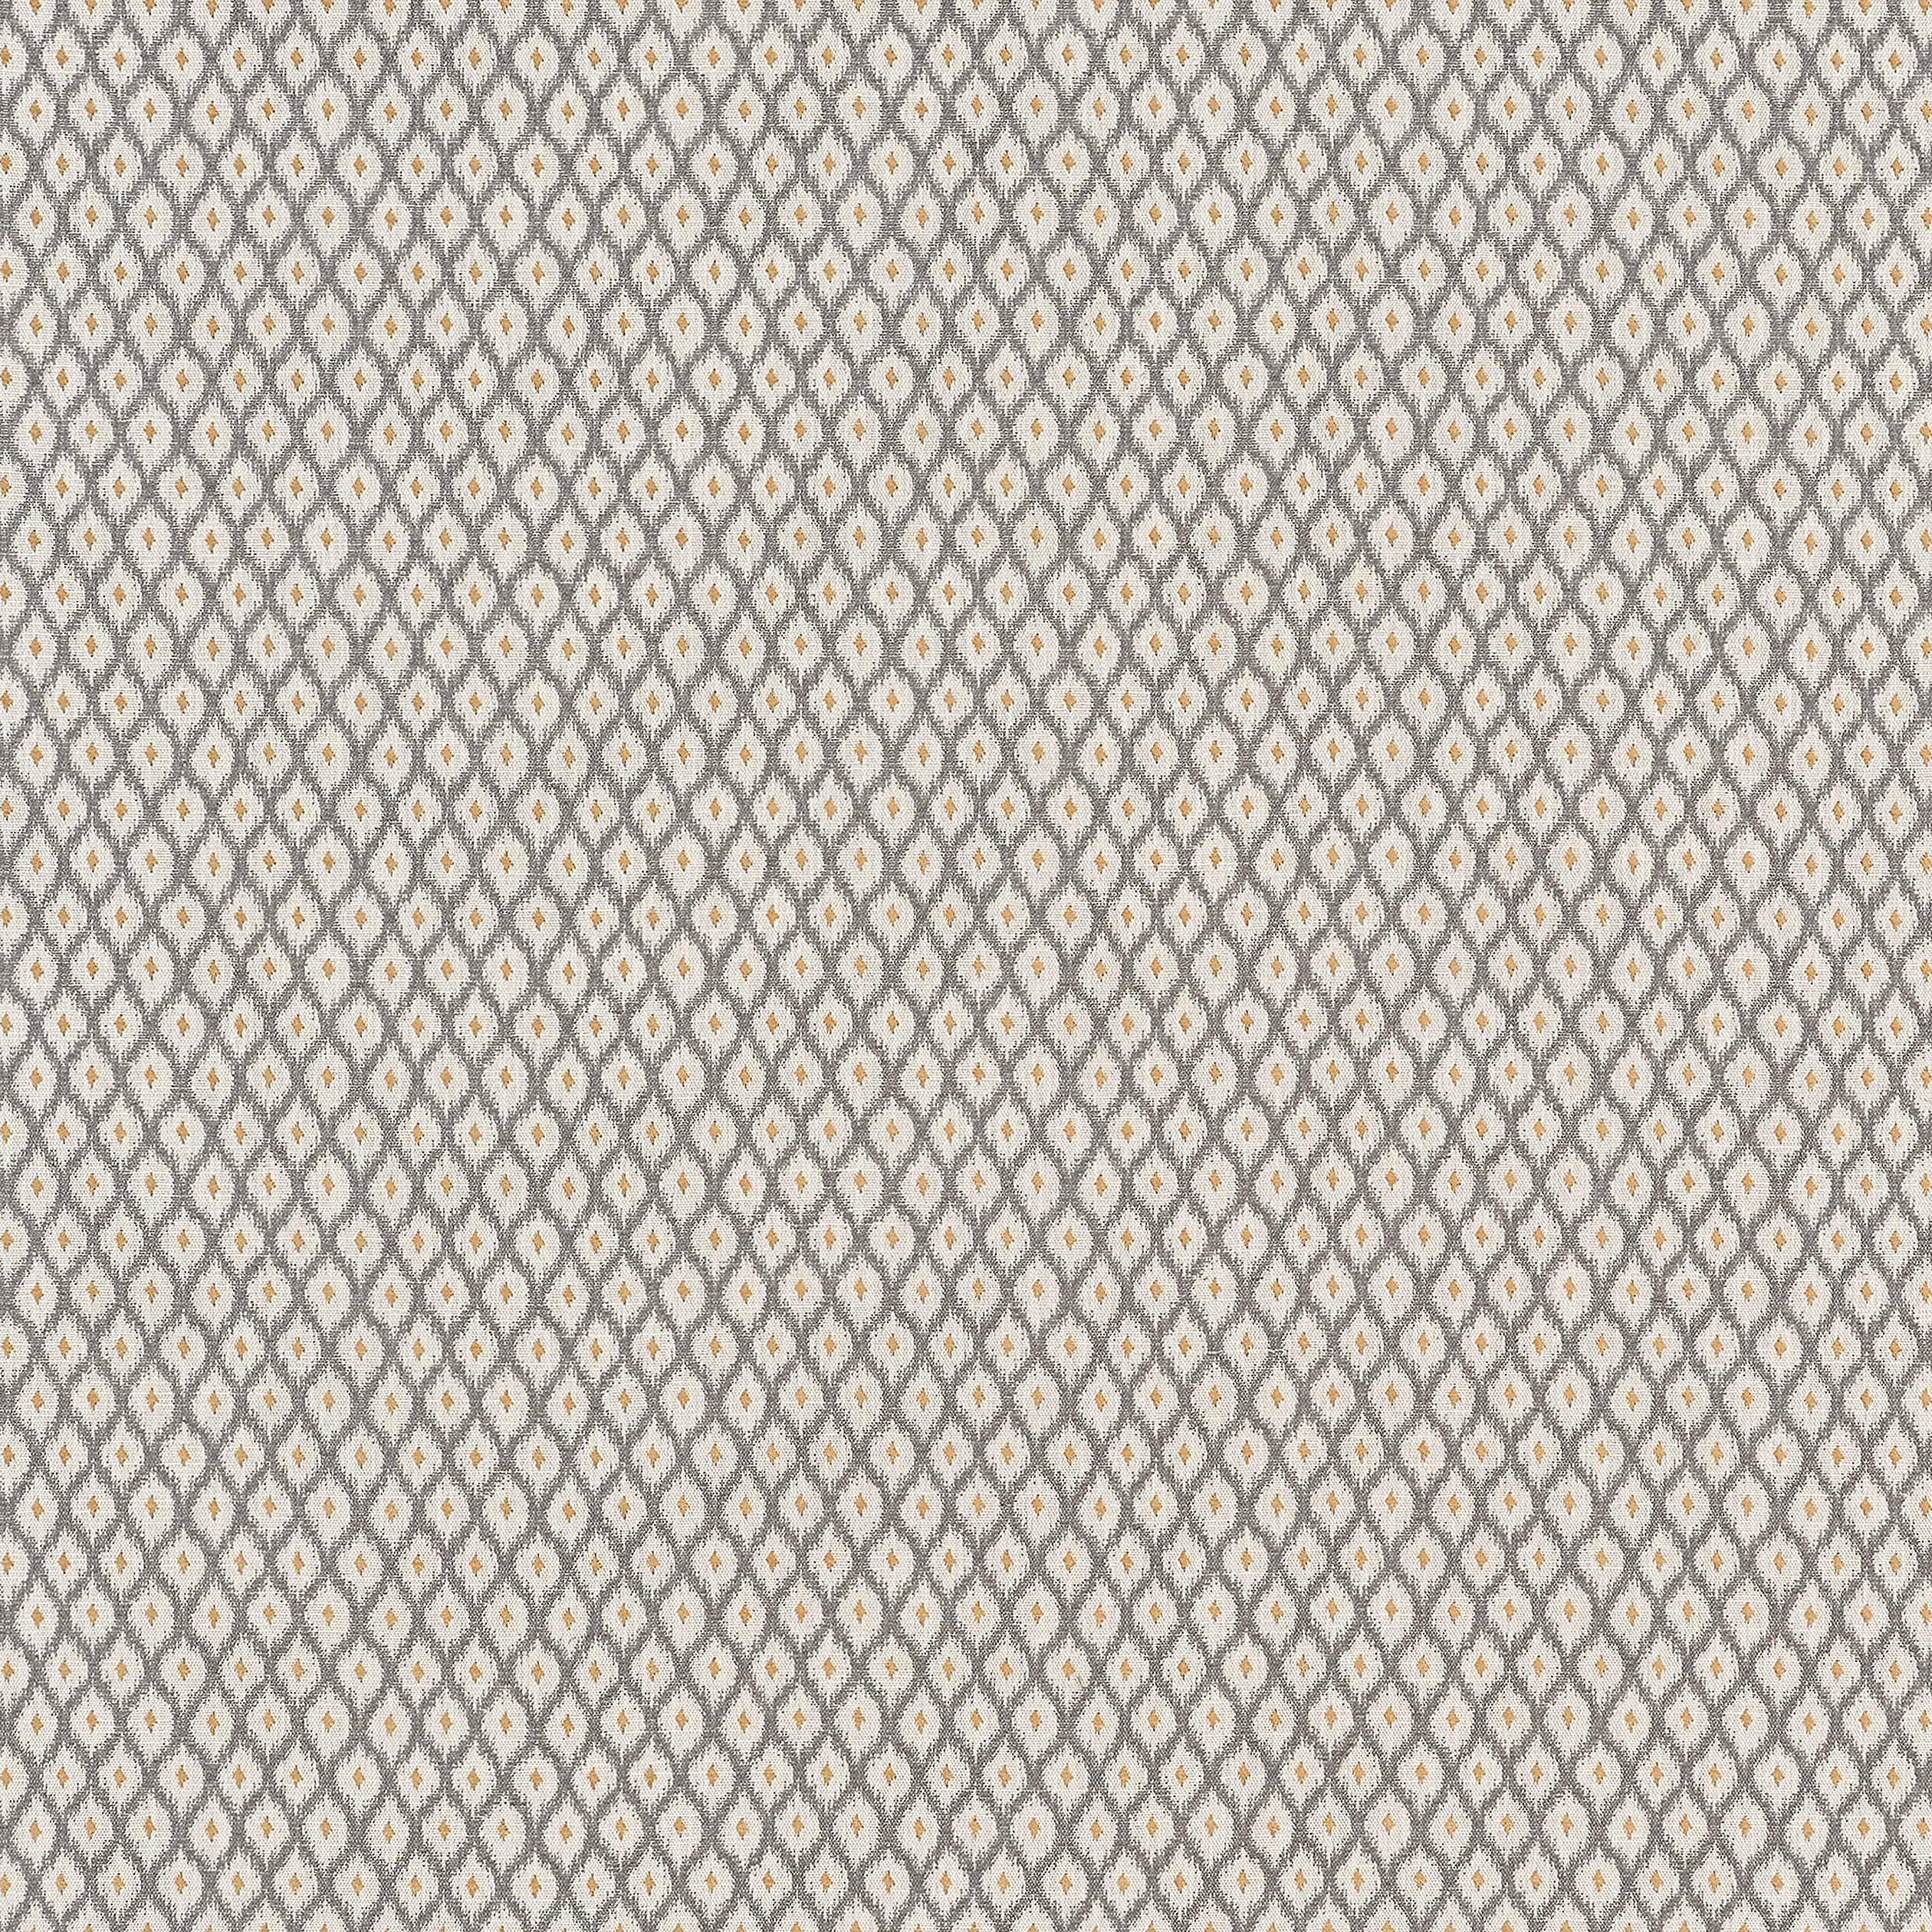 Josephine fabric in smoke color - pattern number W81902 - by Thibaut in the Companions collection